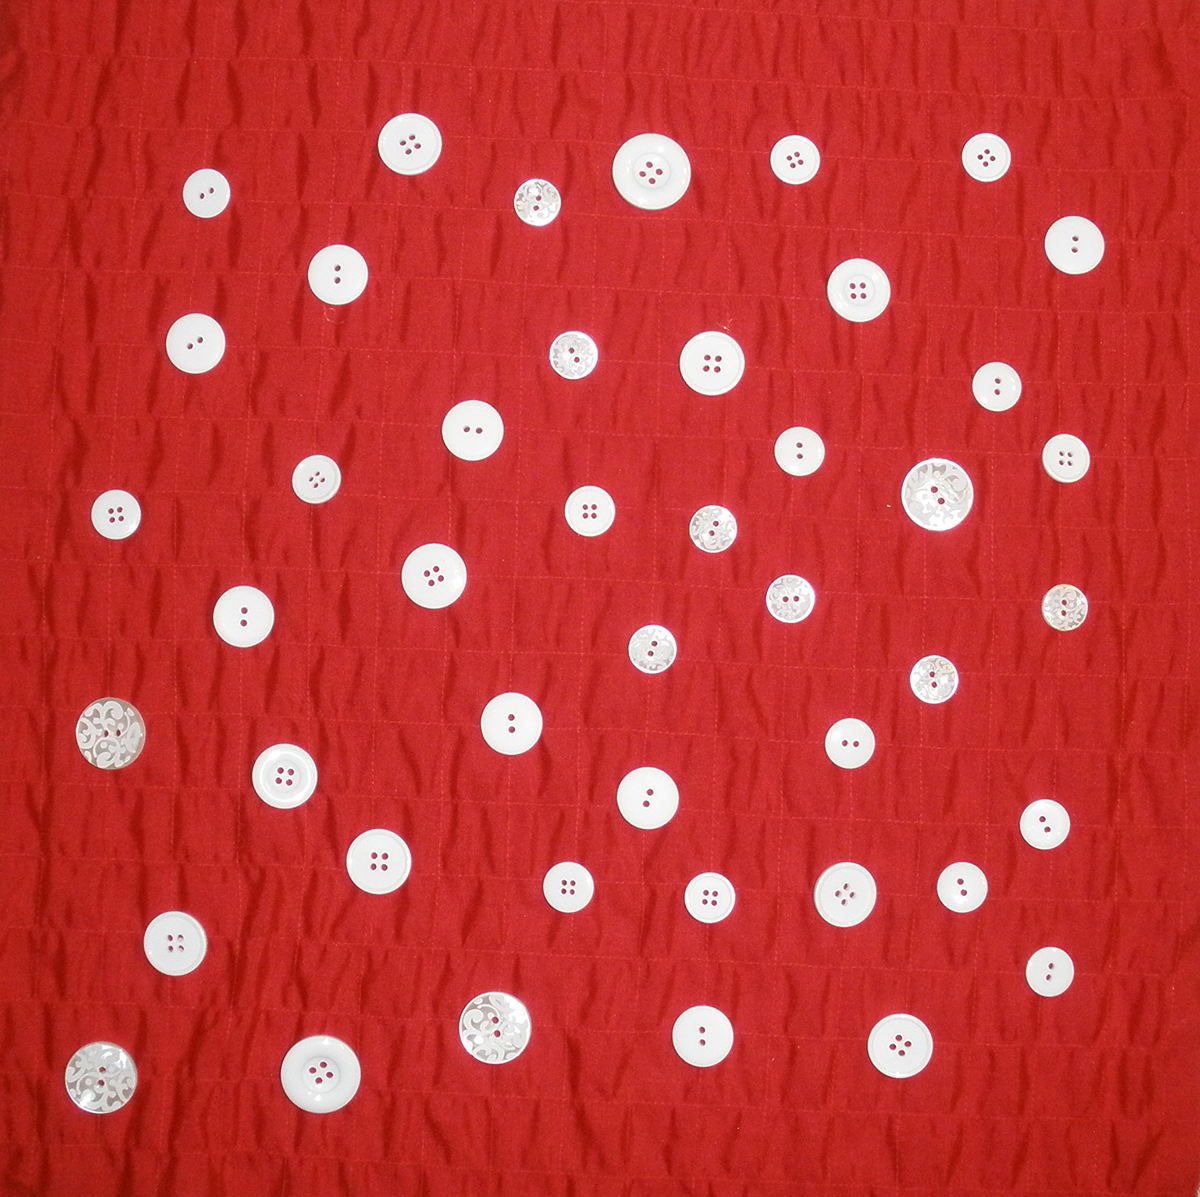 Randomly_Placed_Buttons_on_Pillow_Top